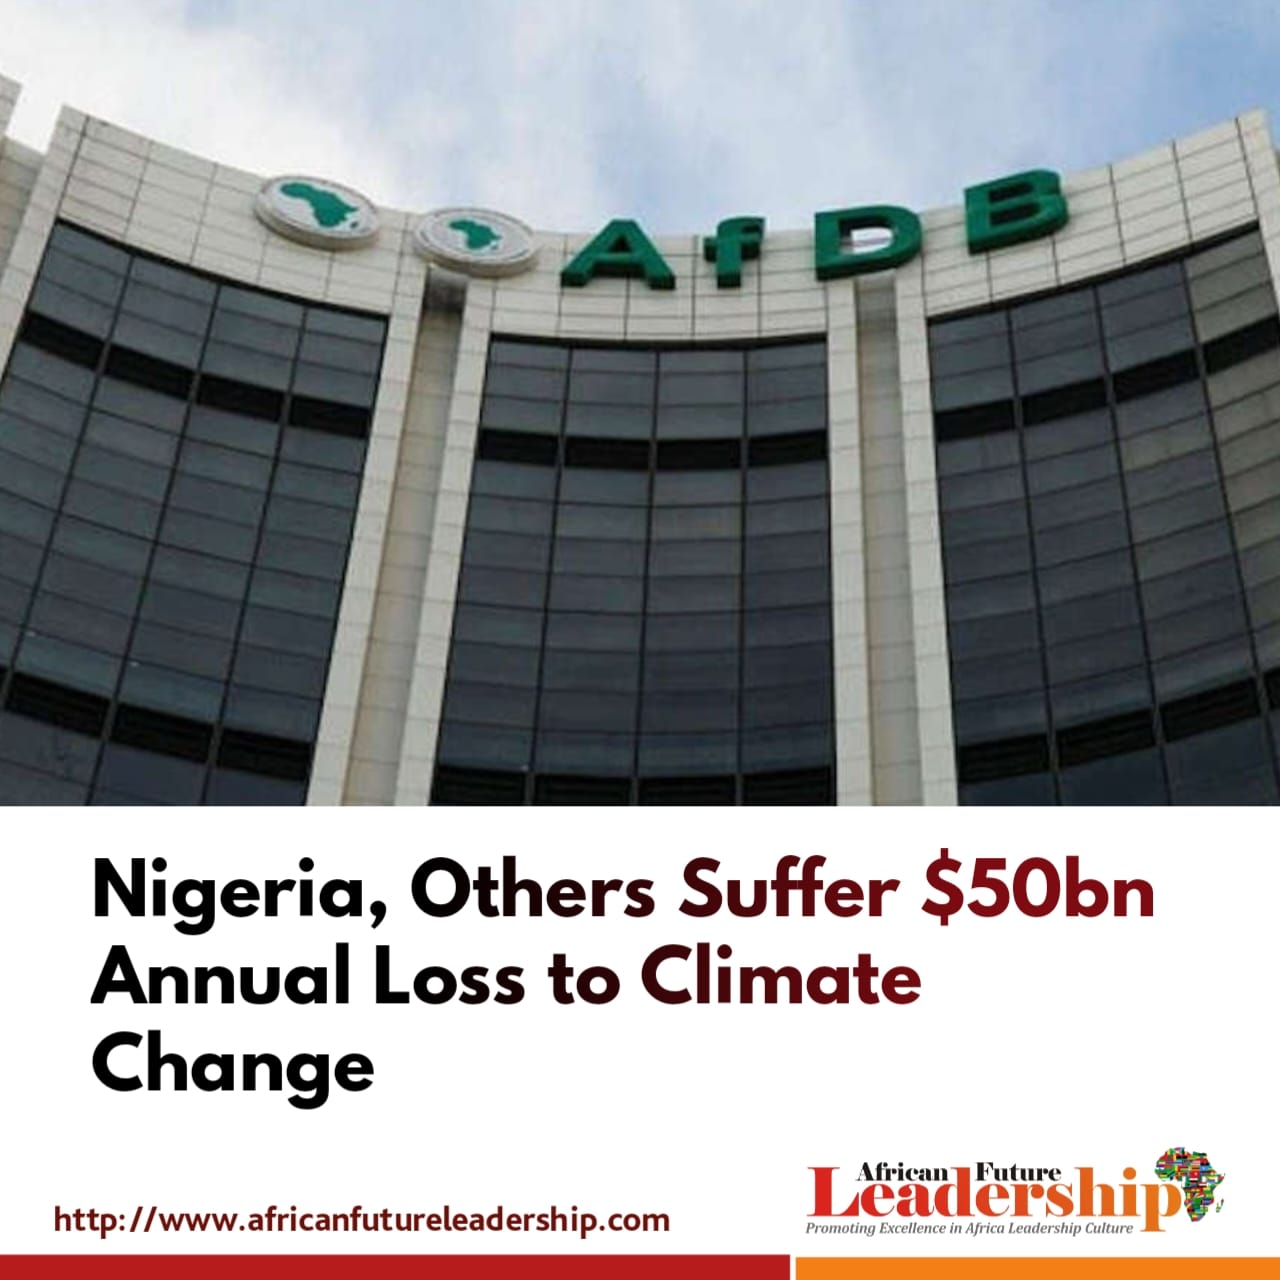 Nigeria, Others Suffer $50bn Annual Loss to Climate Change